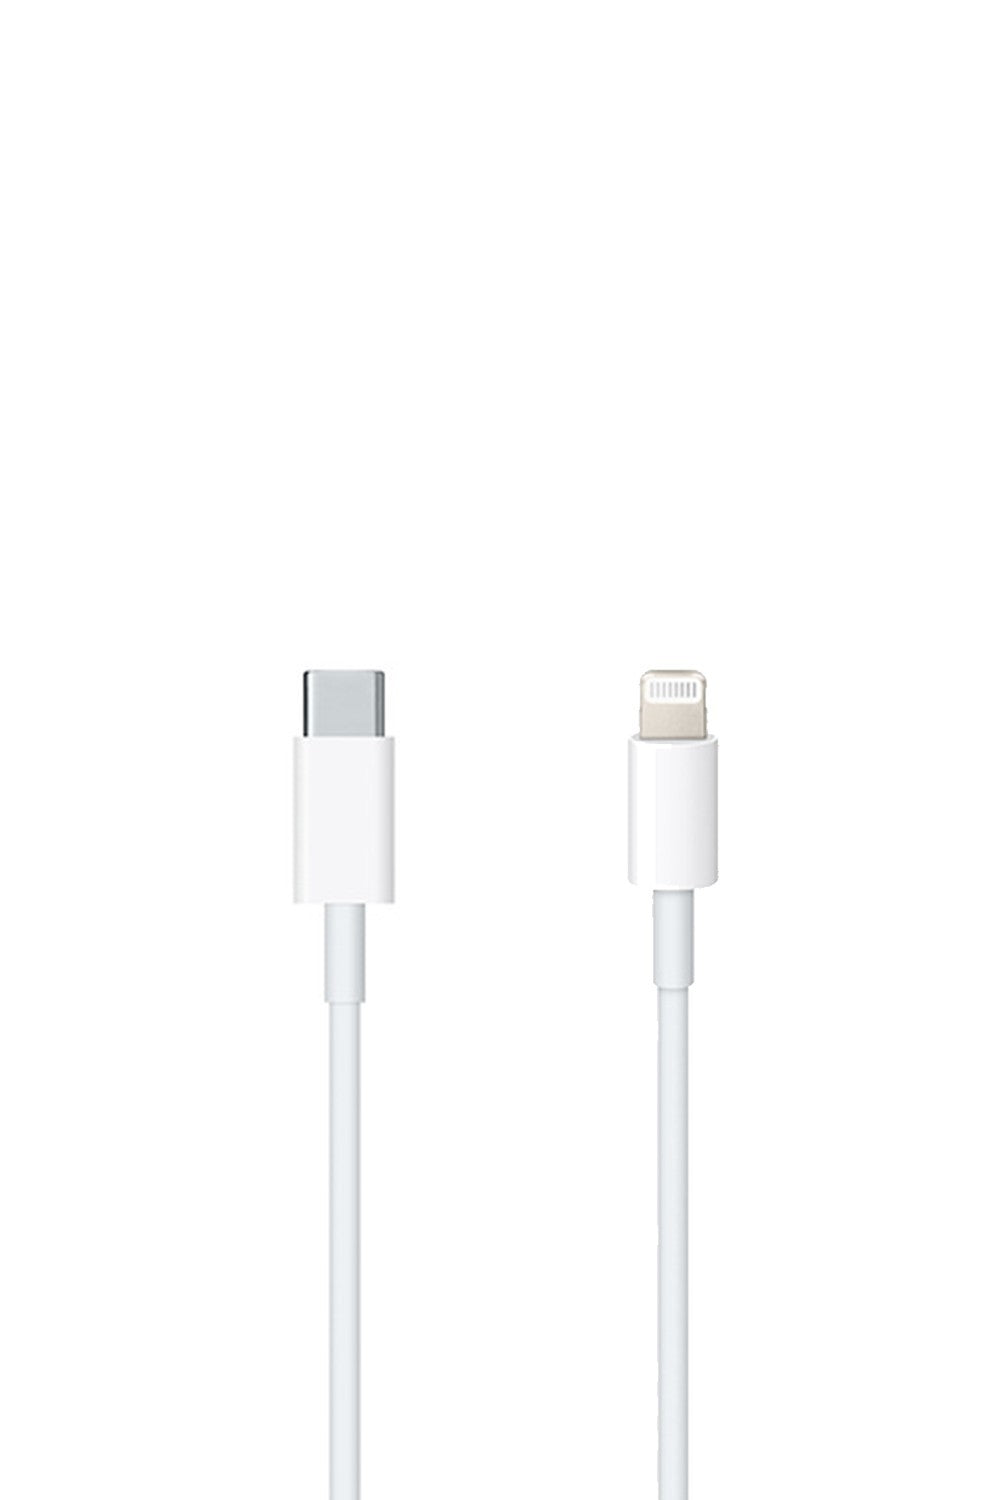 Apple Genuine USB-C to Lightning Charging Cable for iPhone iPad Charger